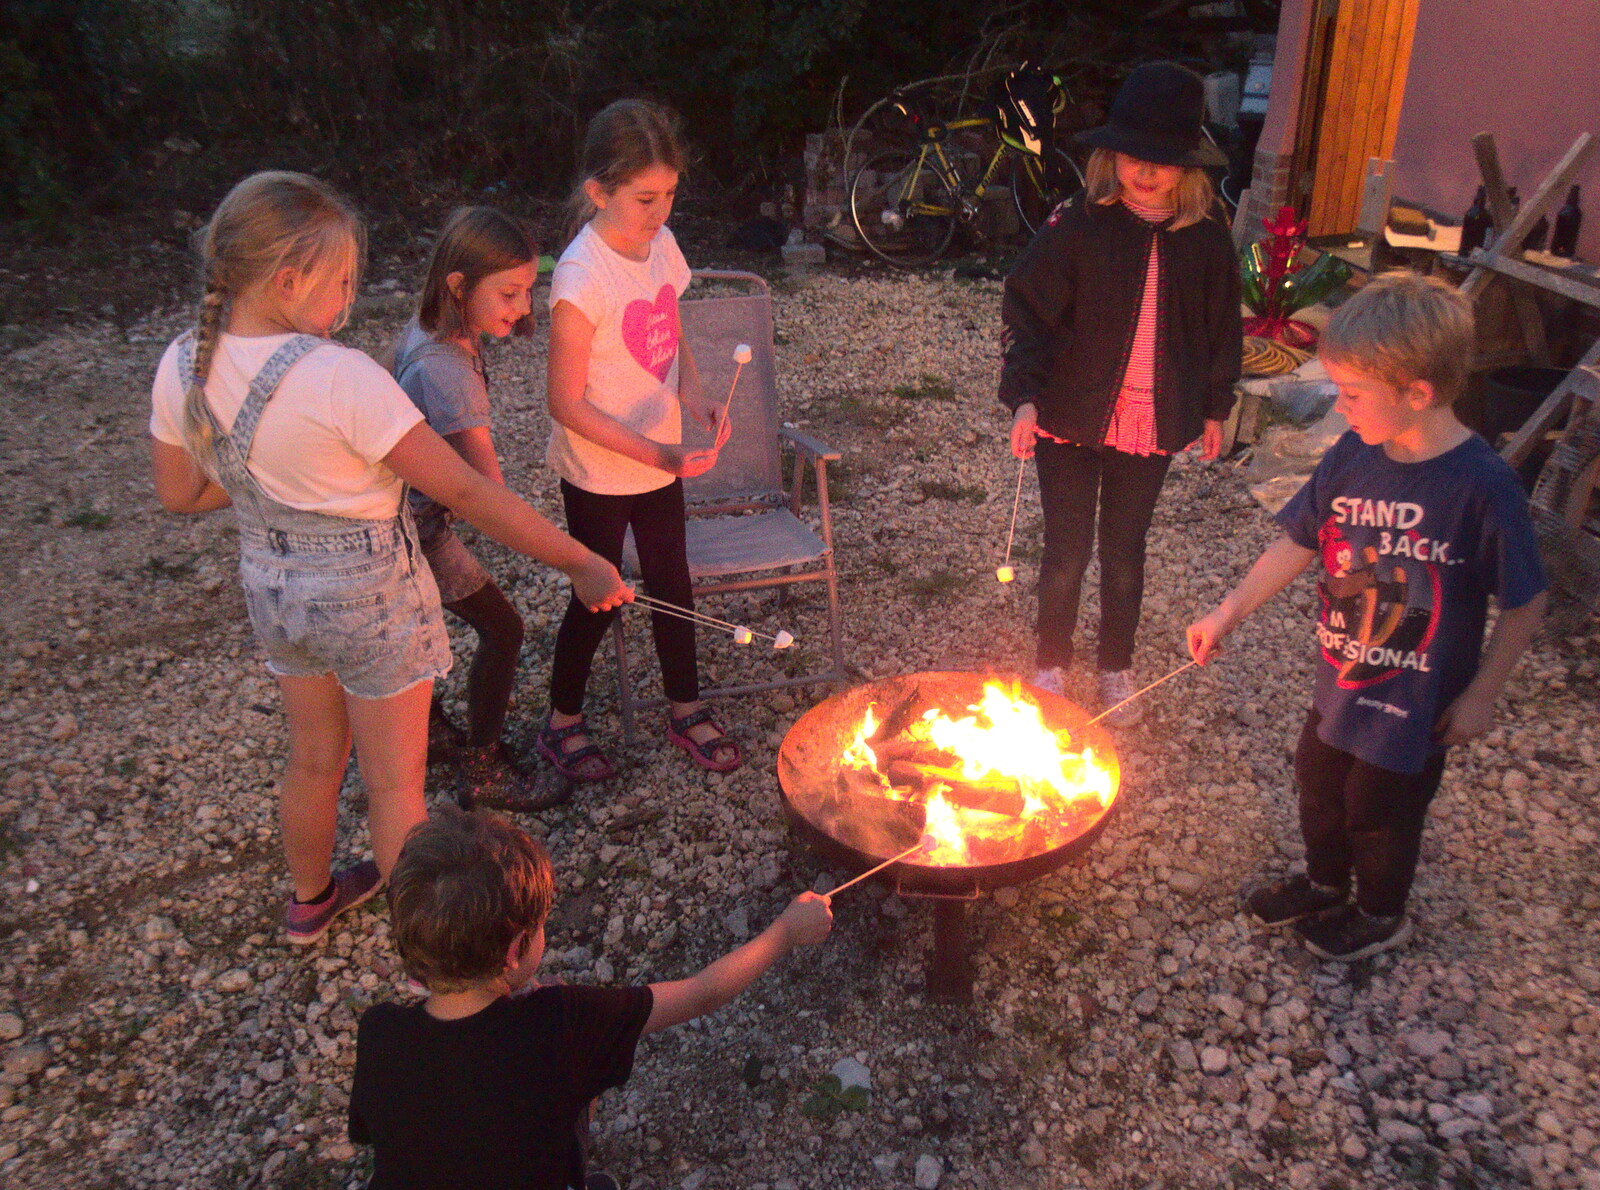 The children do marshmallows in the fire pit from A Summer Party, Brome, Suffolk - 18th August 2018